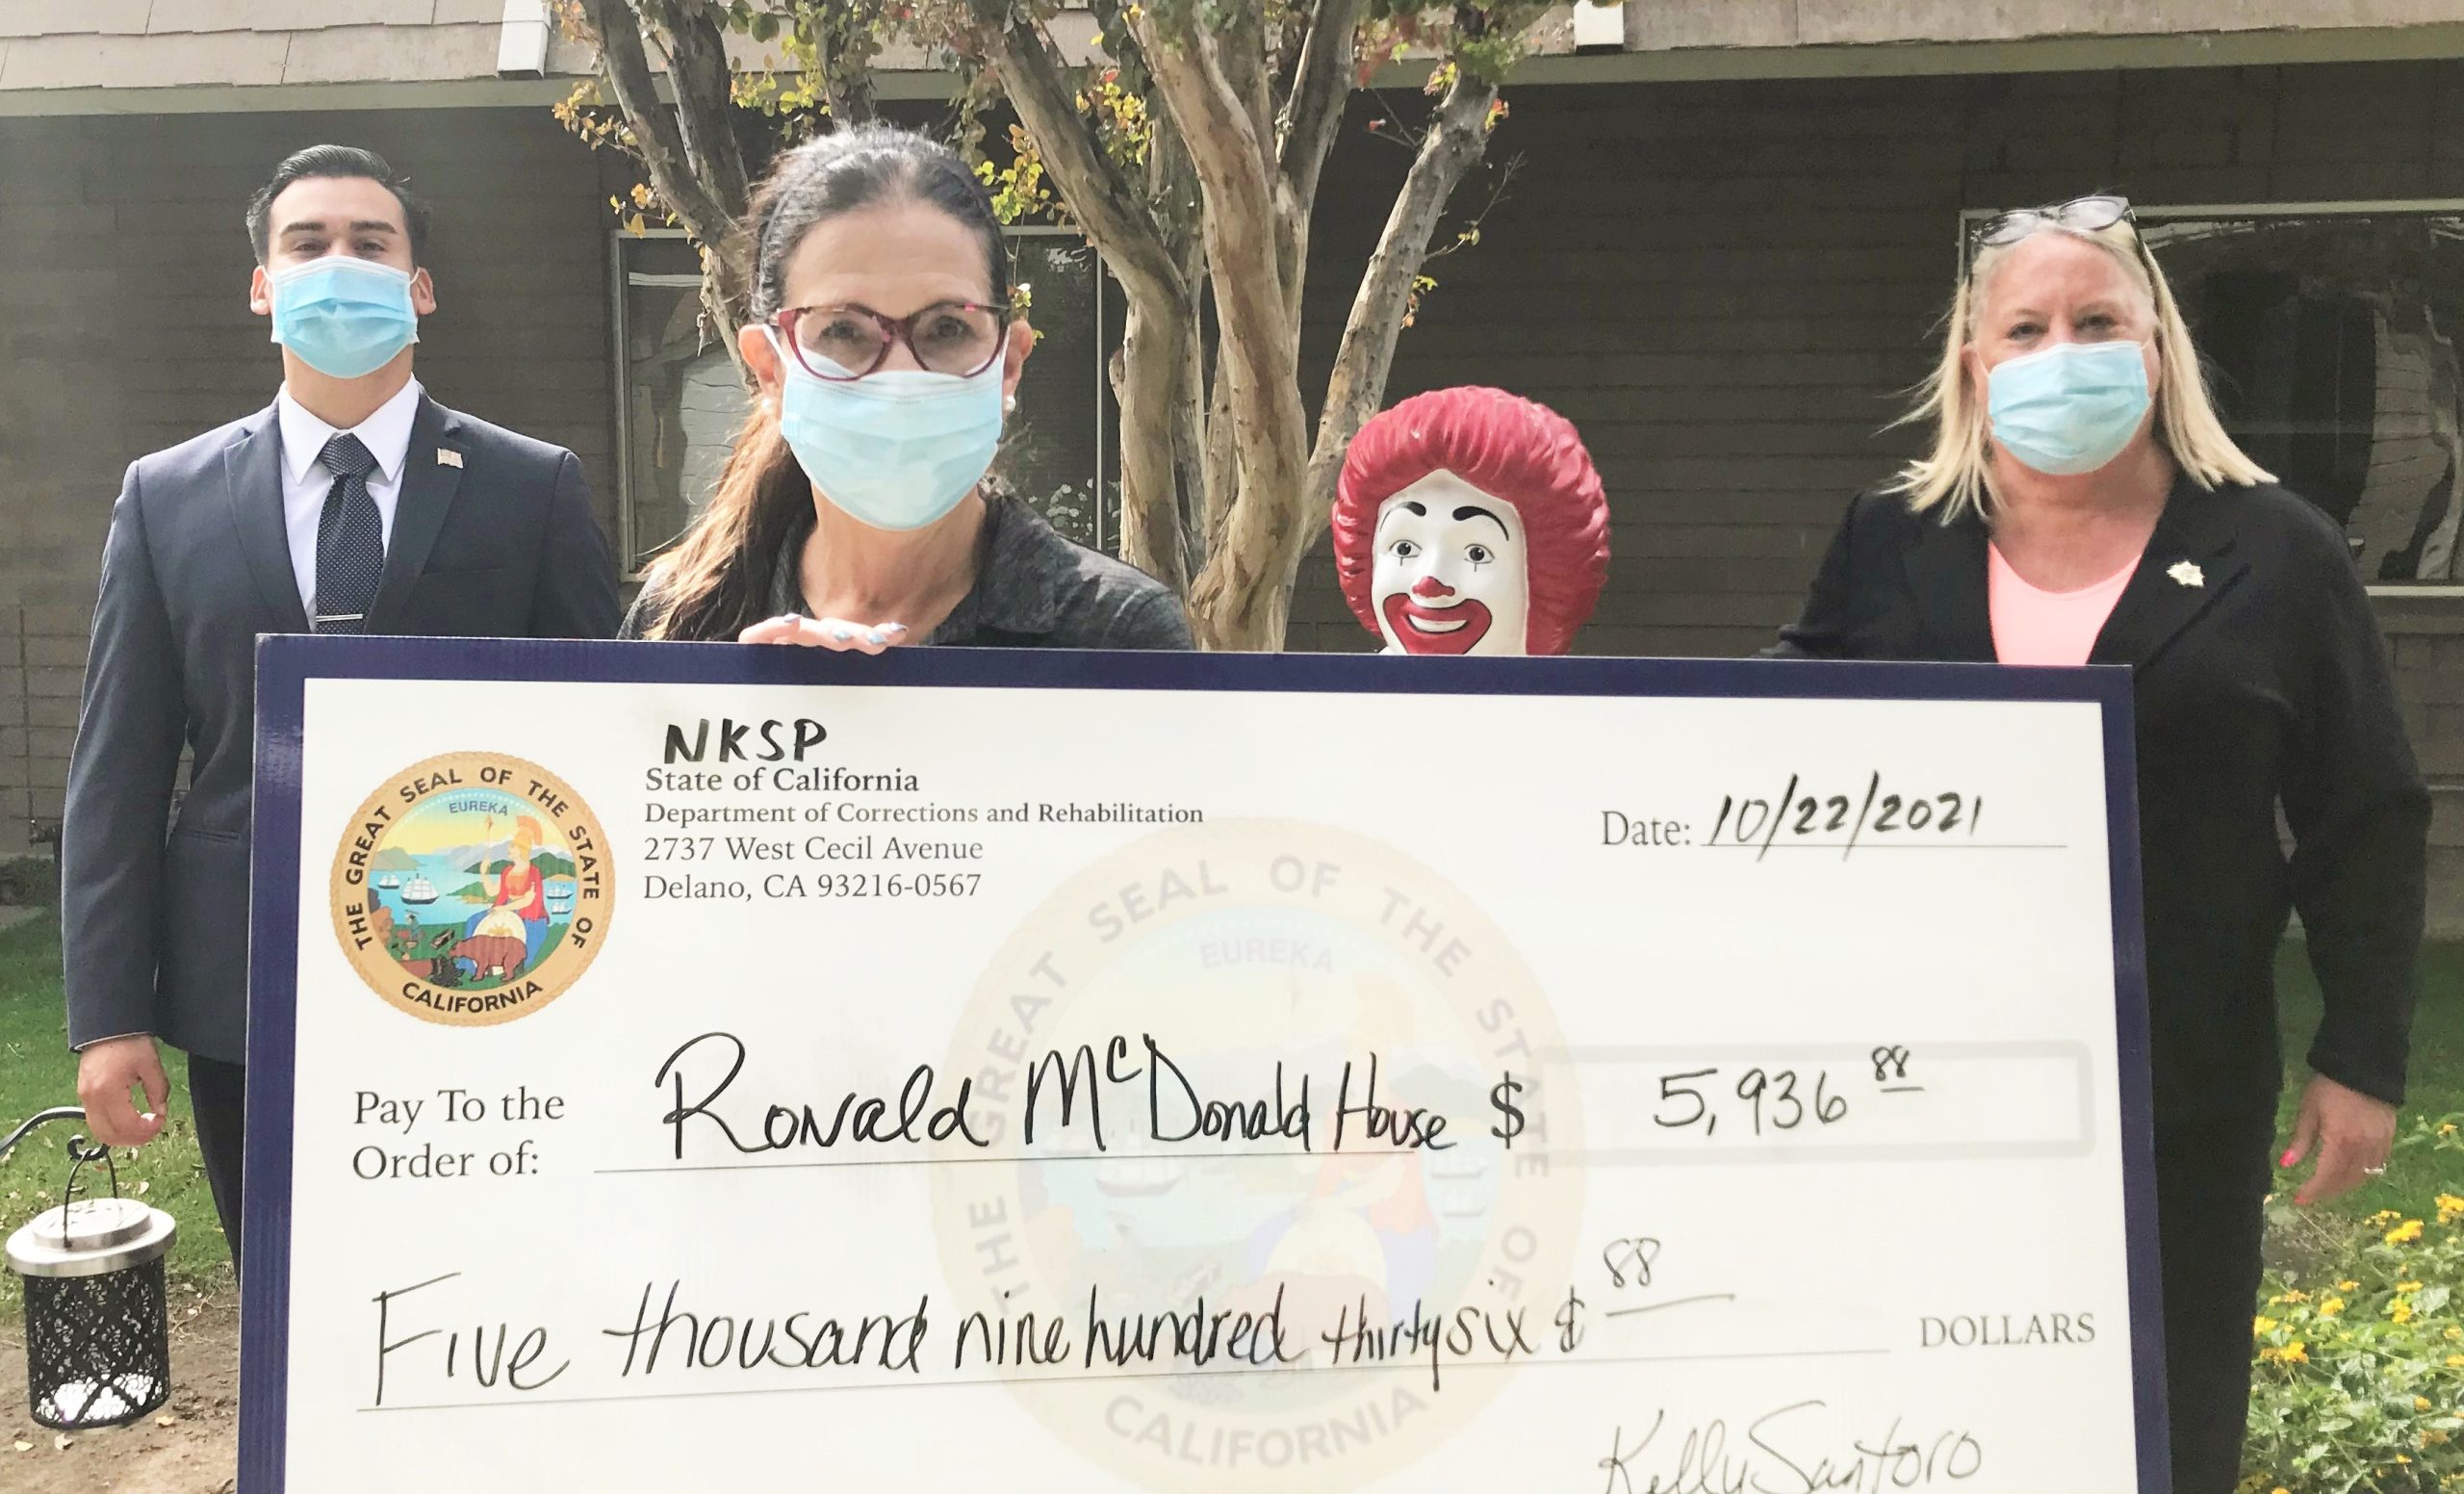 North Kern prison staff donate to charities such as Ronald McDonald House.